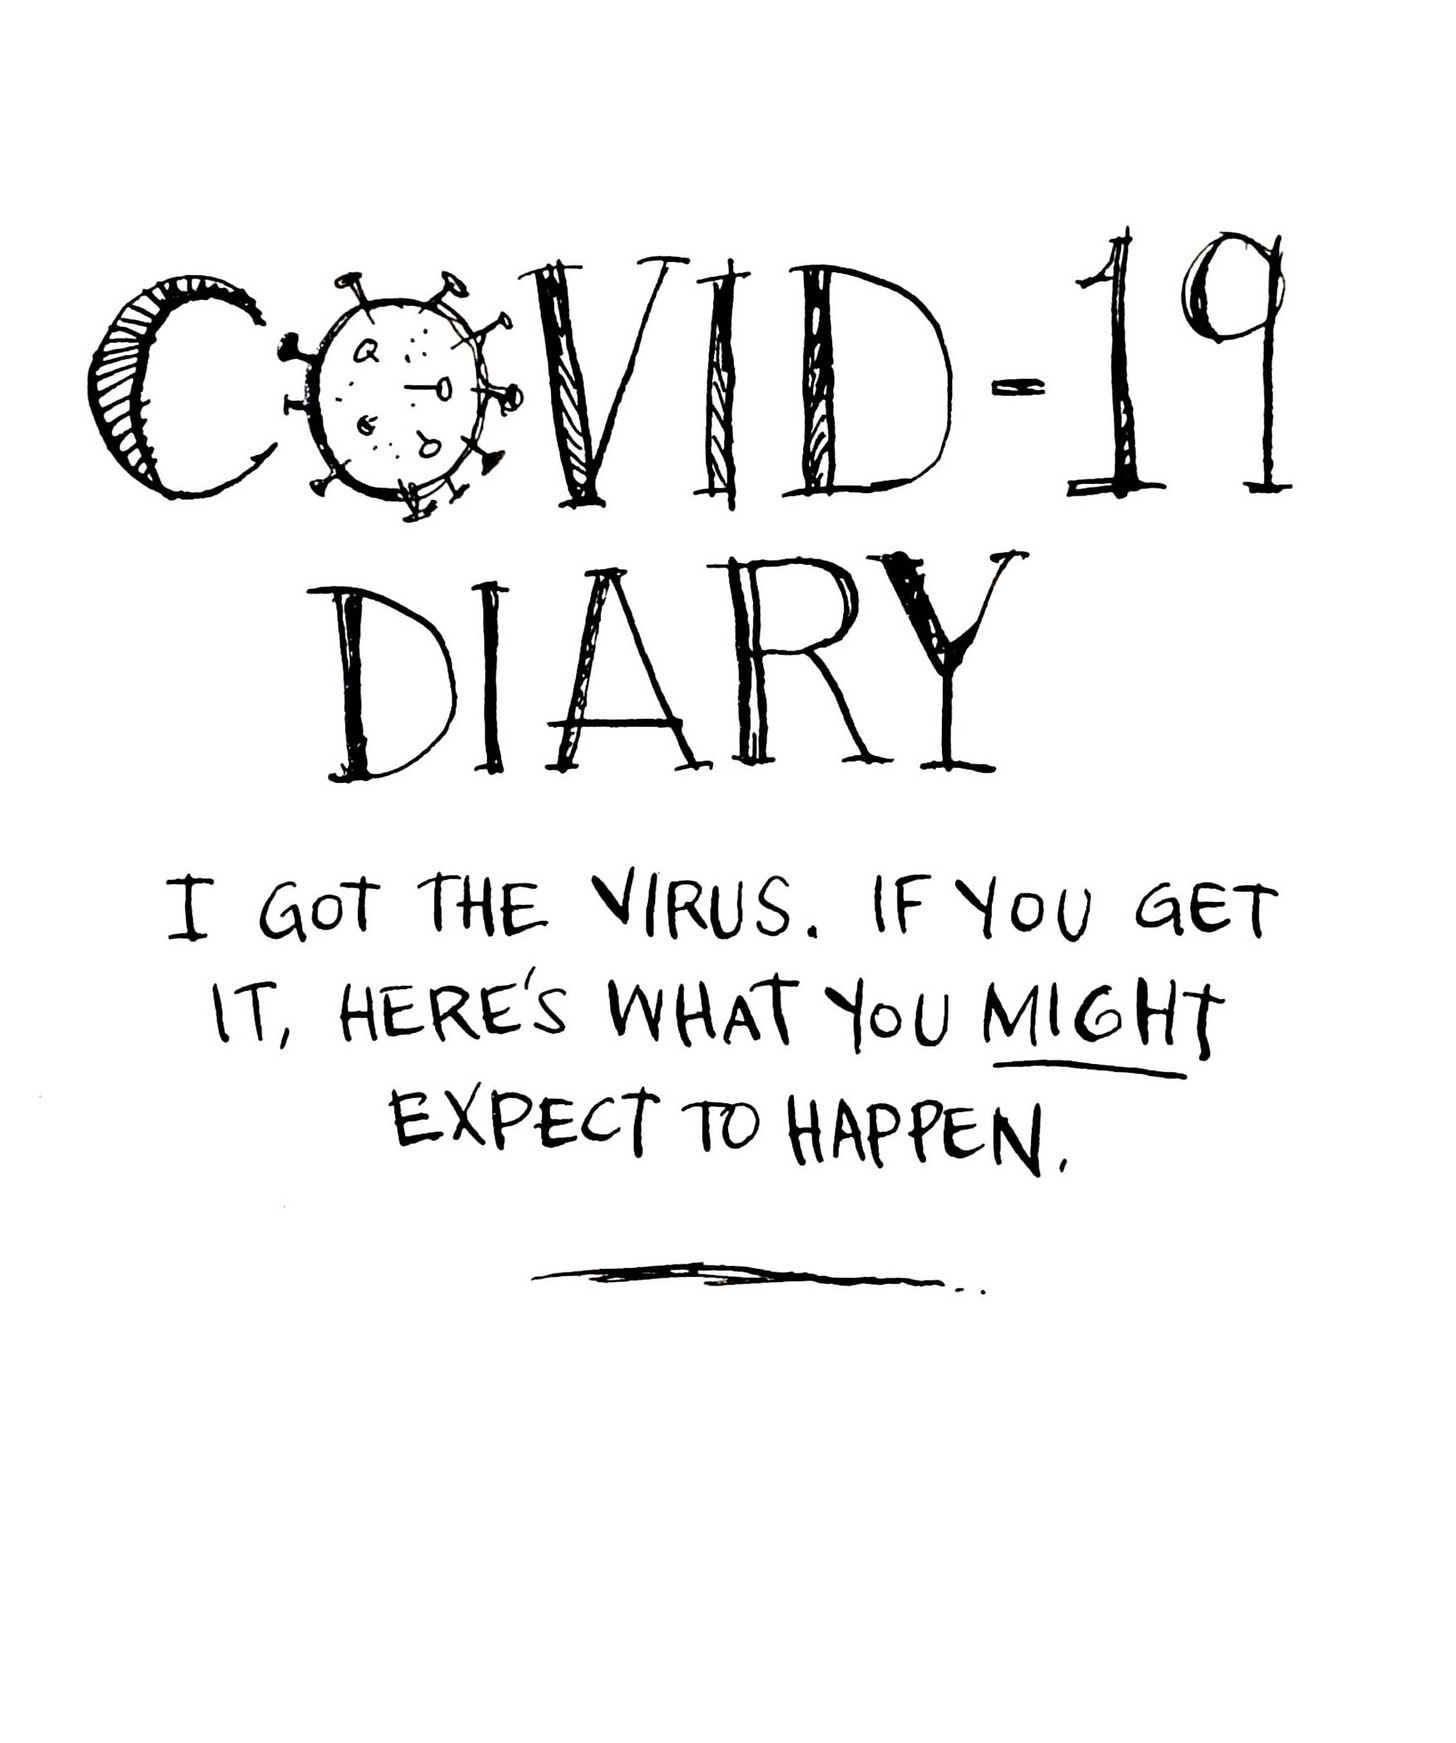 Covid-19 diary. I got the virus. If you get it, here's what you might expect to happen.